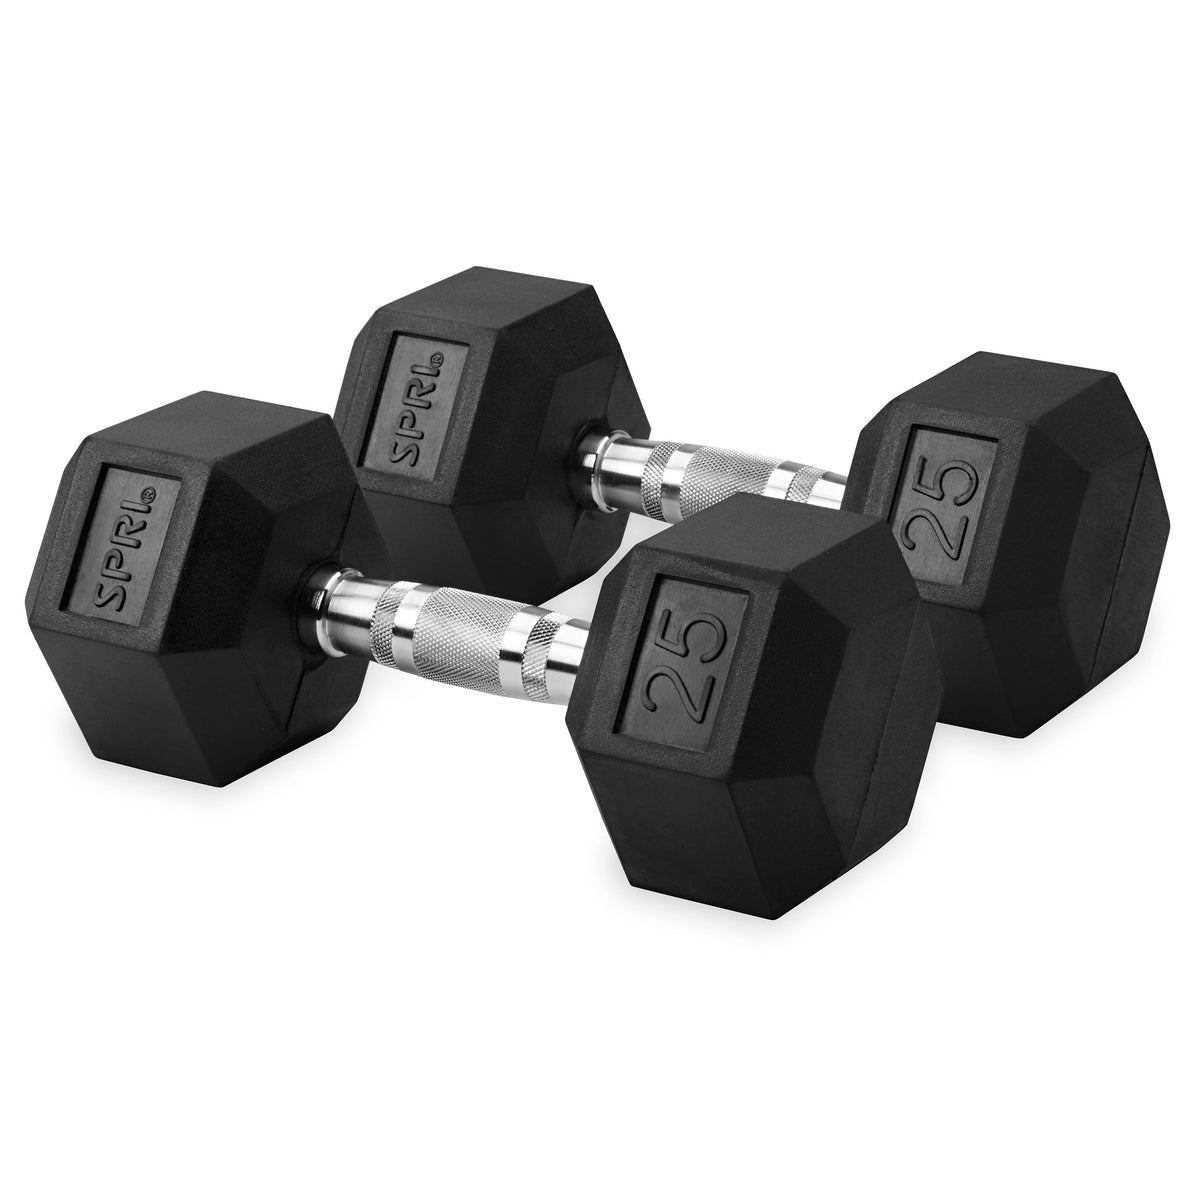 6-sided hex weights 25lbs